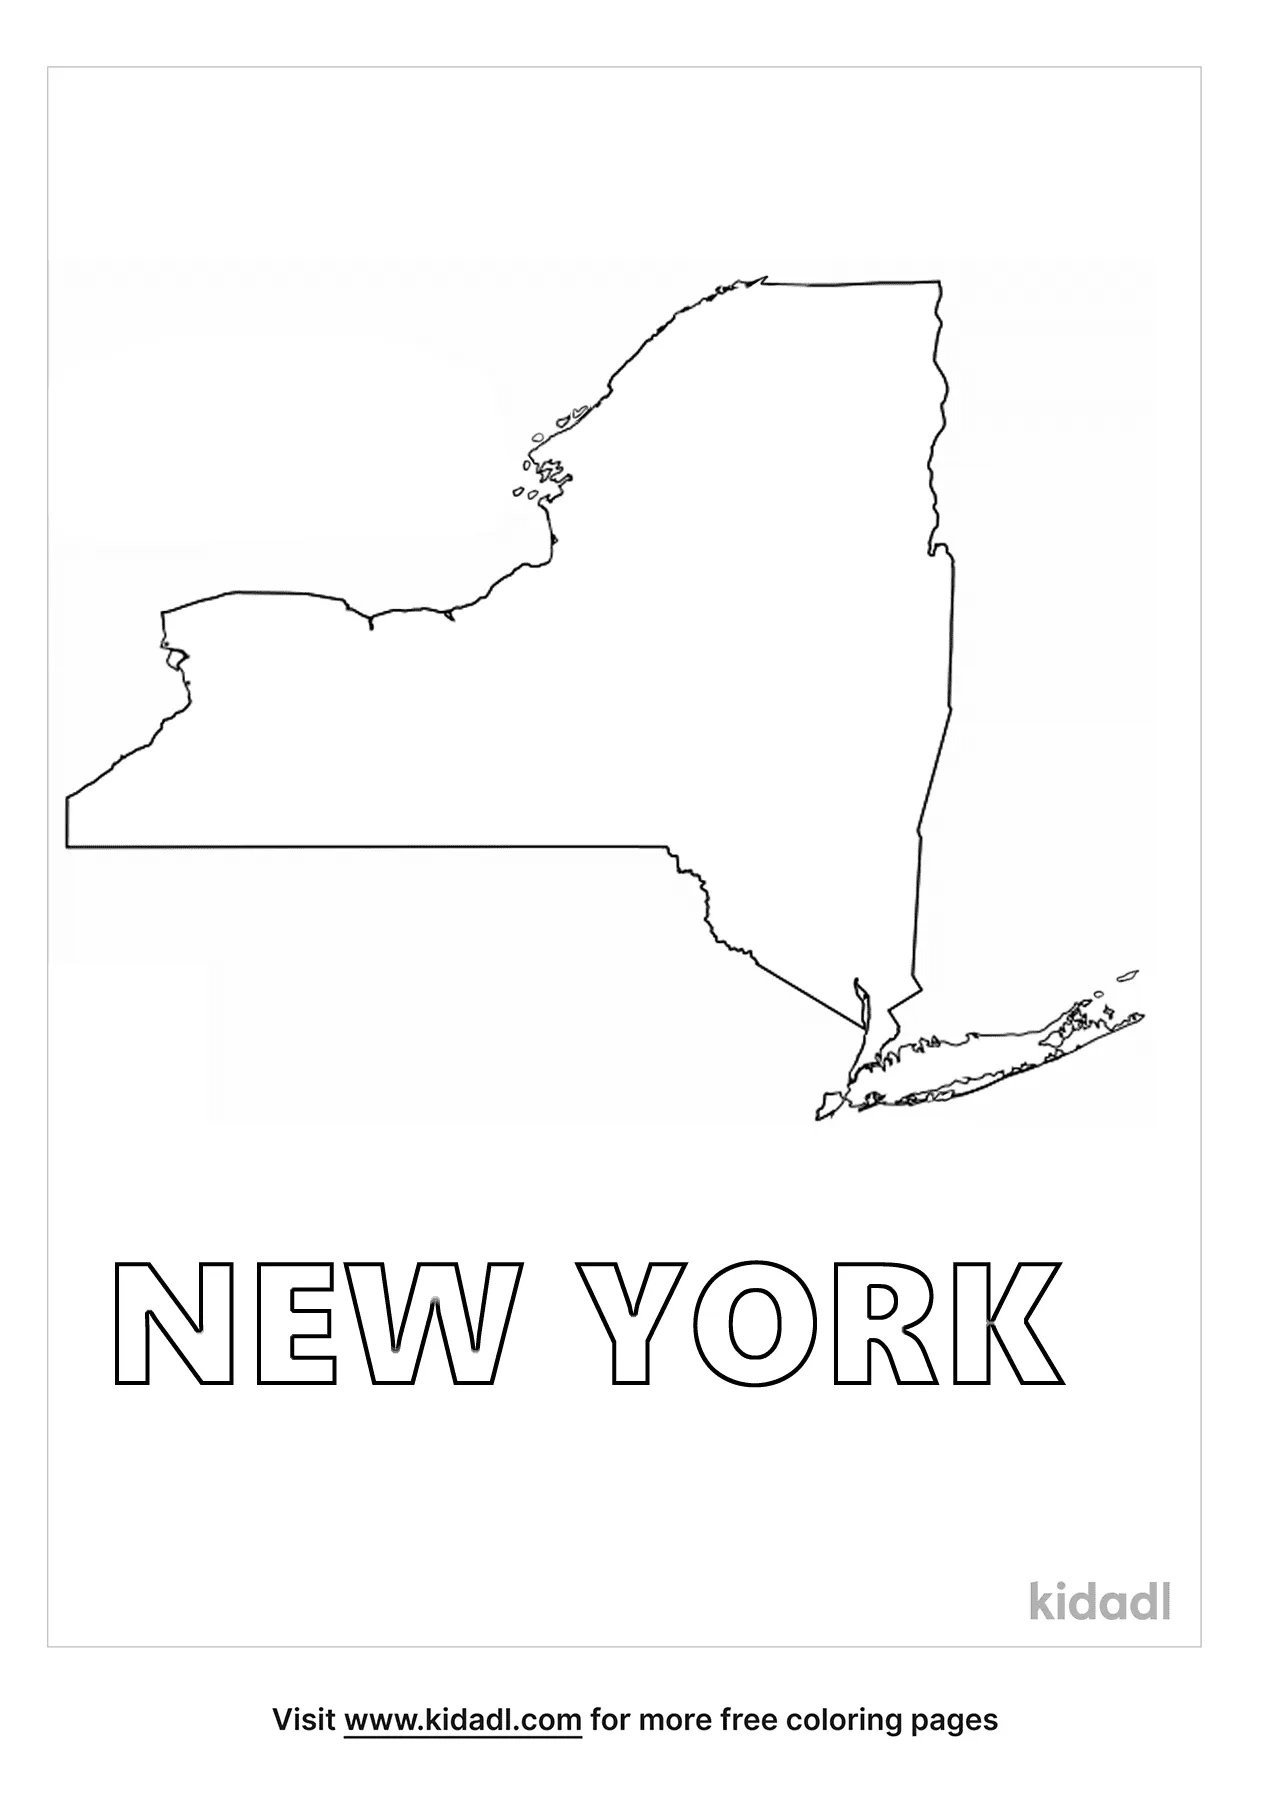 Free new york state coloring page coloring page printables